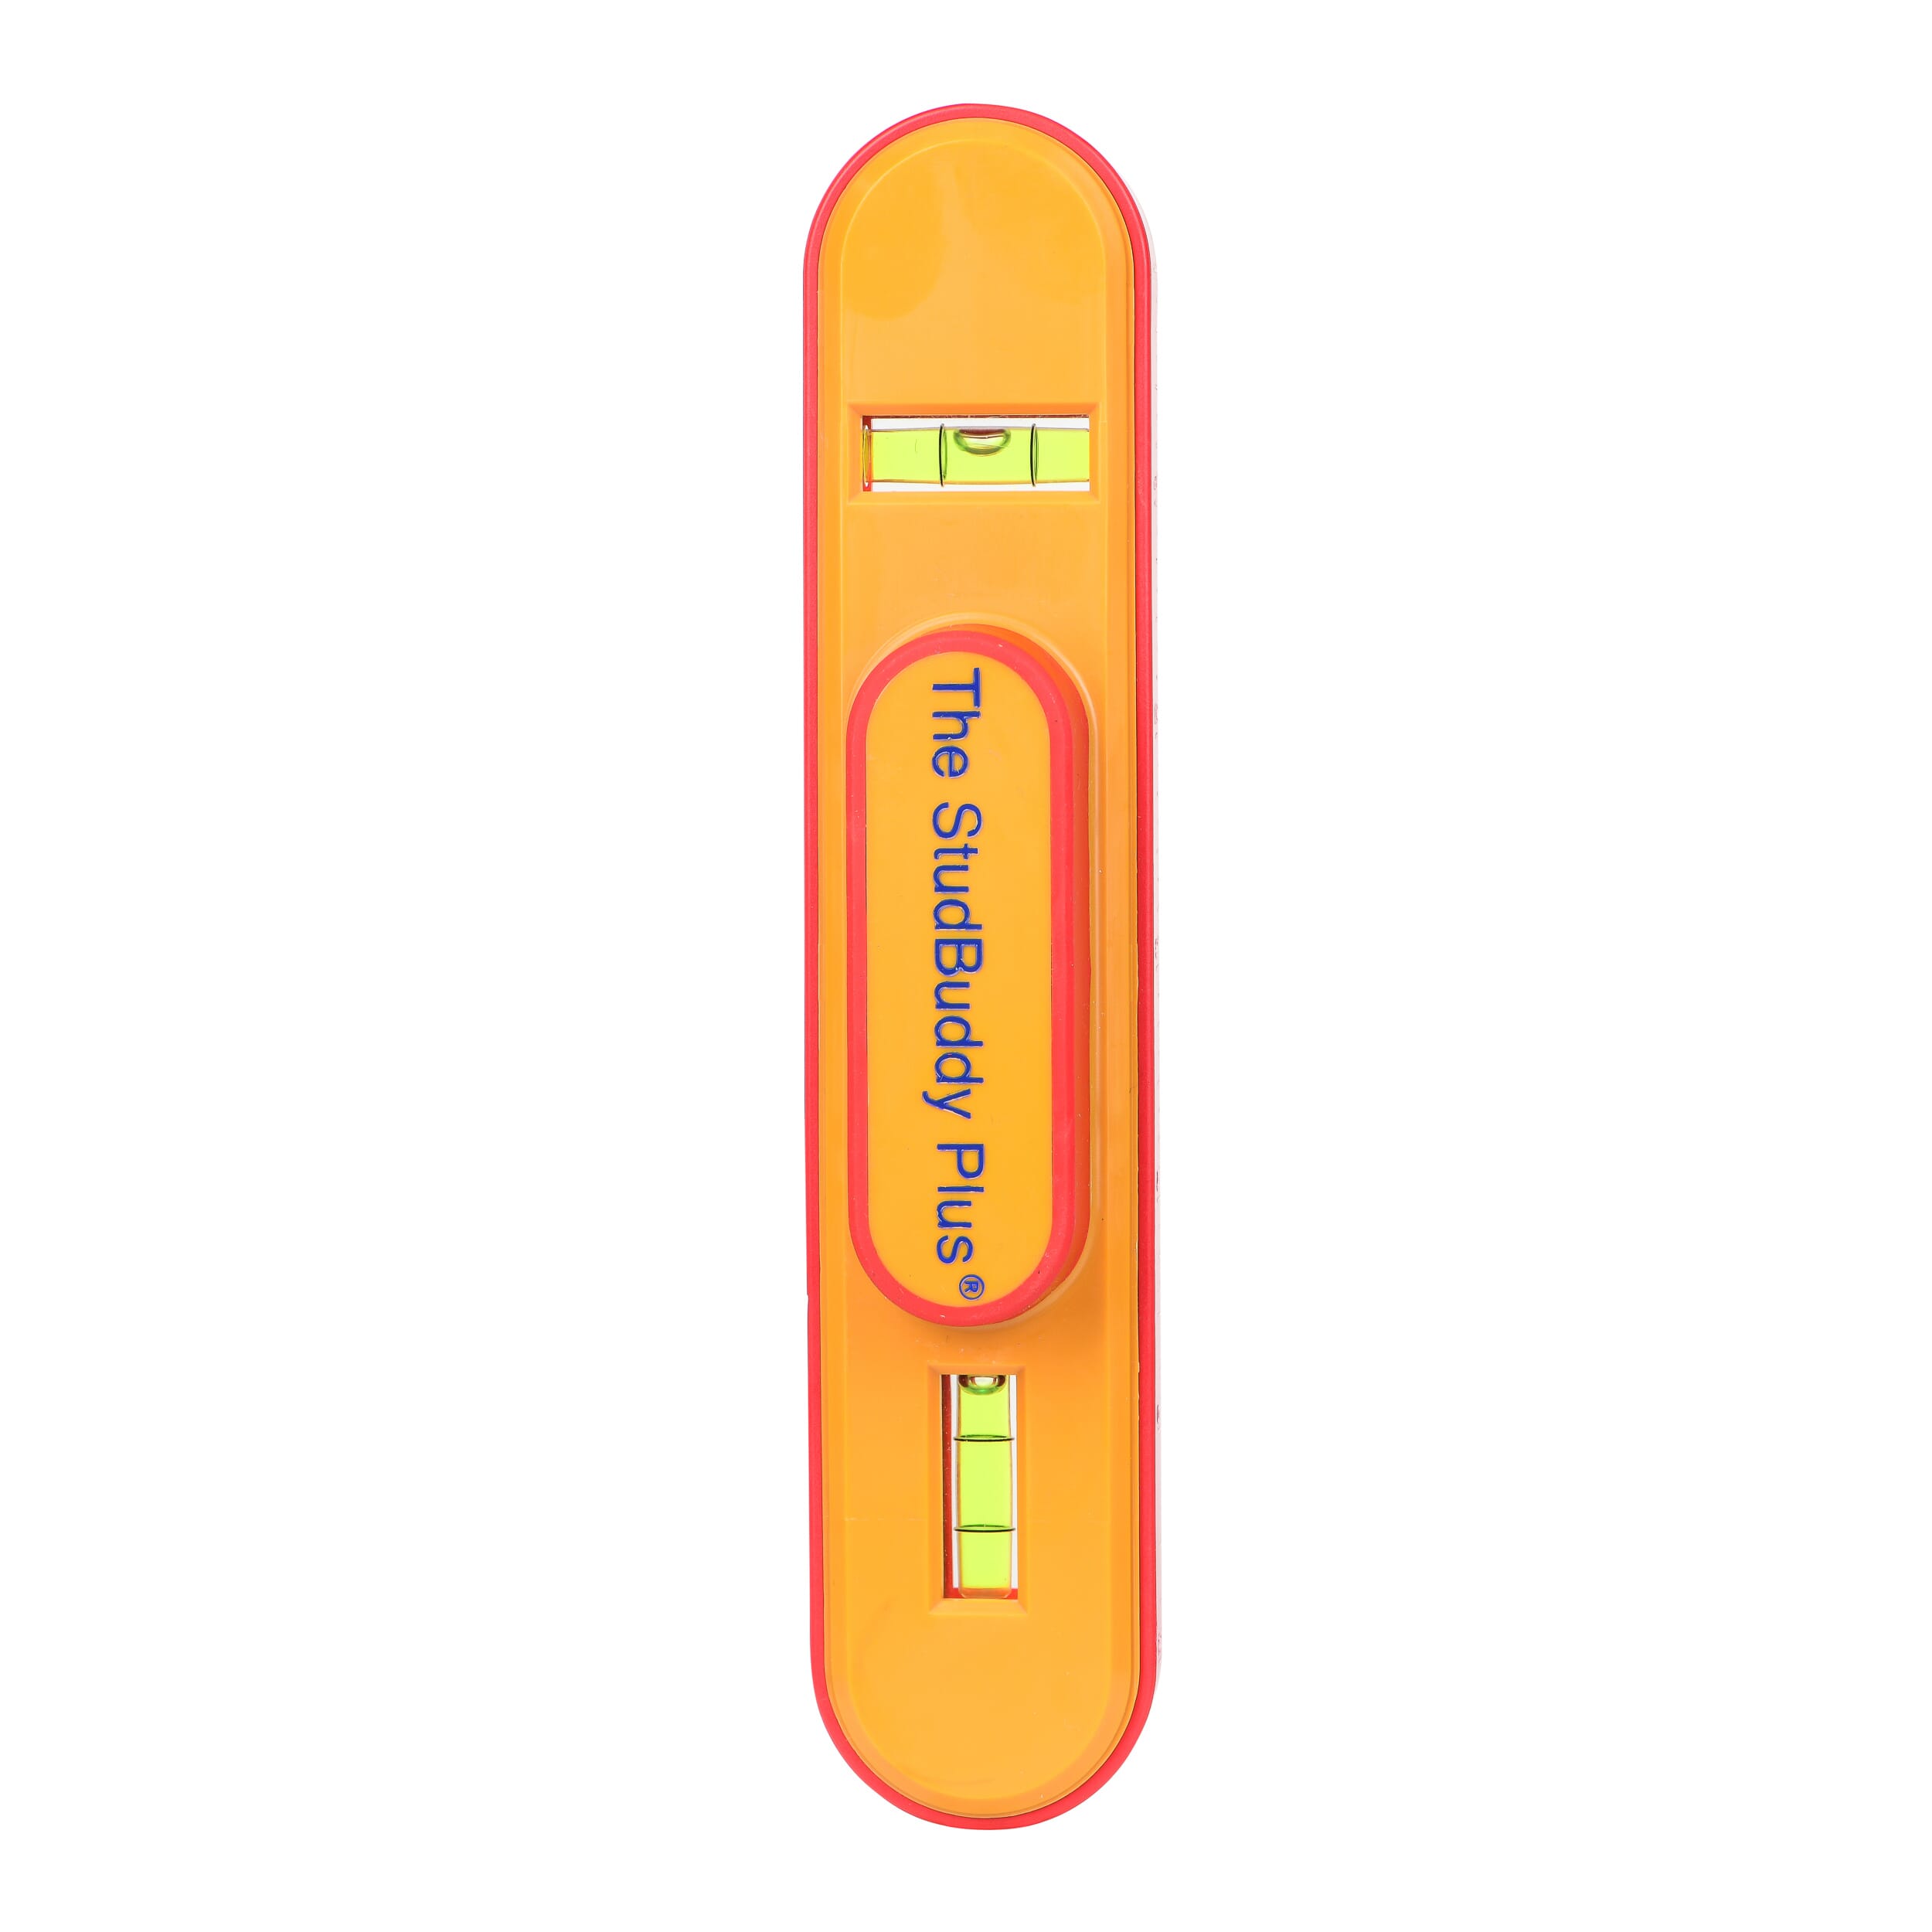  The StudBuddy Plus Magnetic Stud Finder and Level